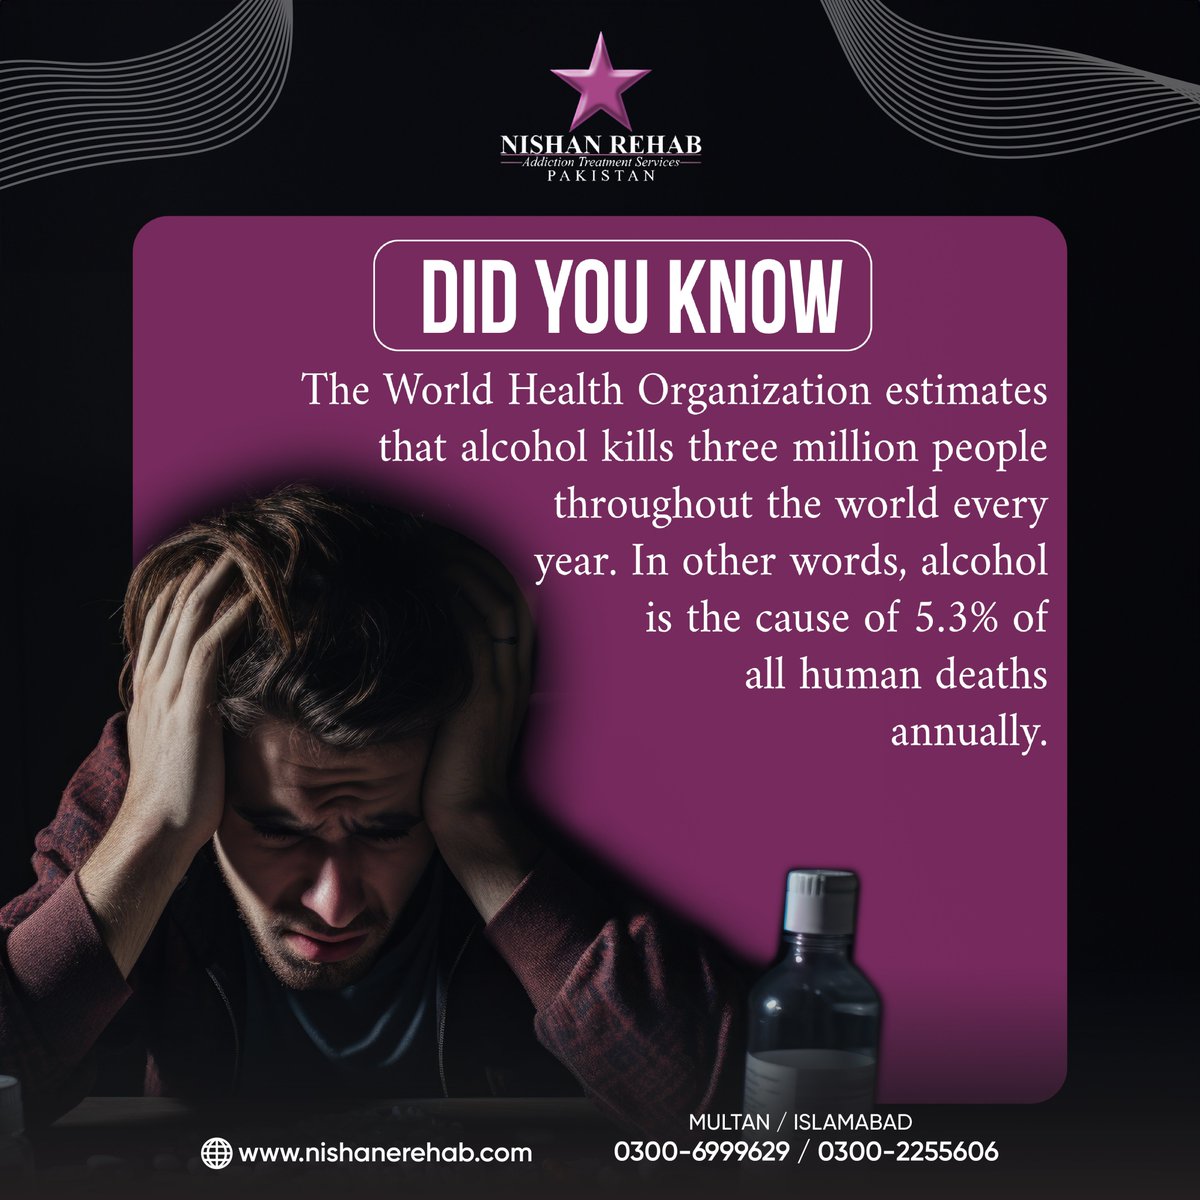 At Nishan Rehab, we're addressing the stark truth: three million lives are lost to alcohol yearly.
Our clinic provides tailored rehabilitation programs, 
#didyouknow #AlcoholAwareness #RecoveryJourney #AddictionTreatment #NishanRehab